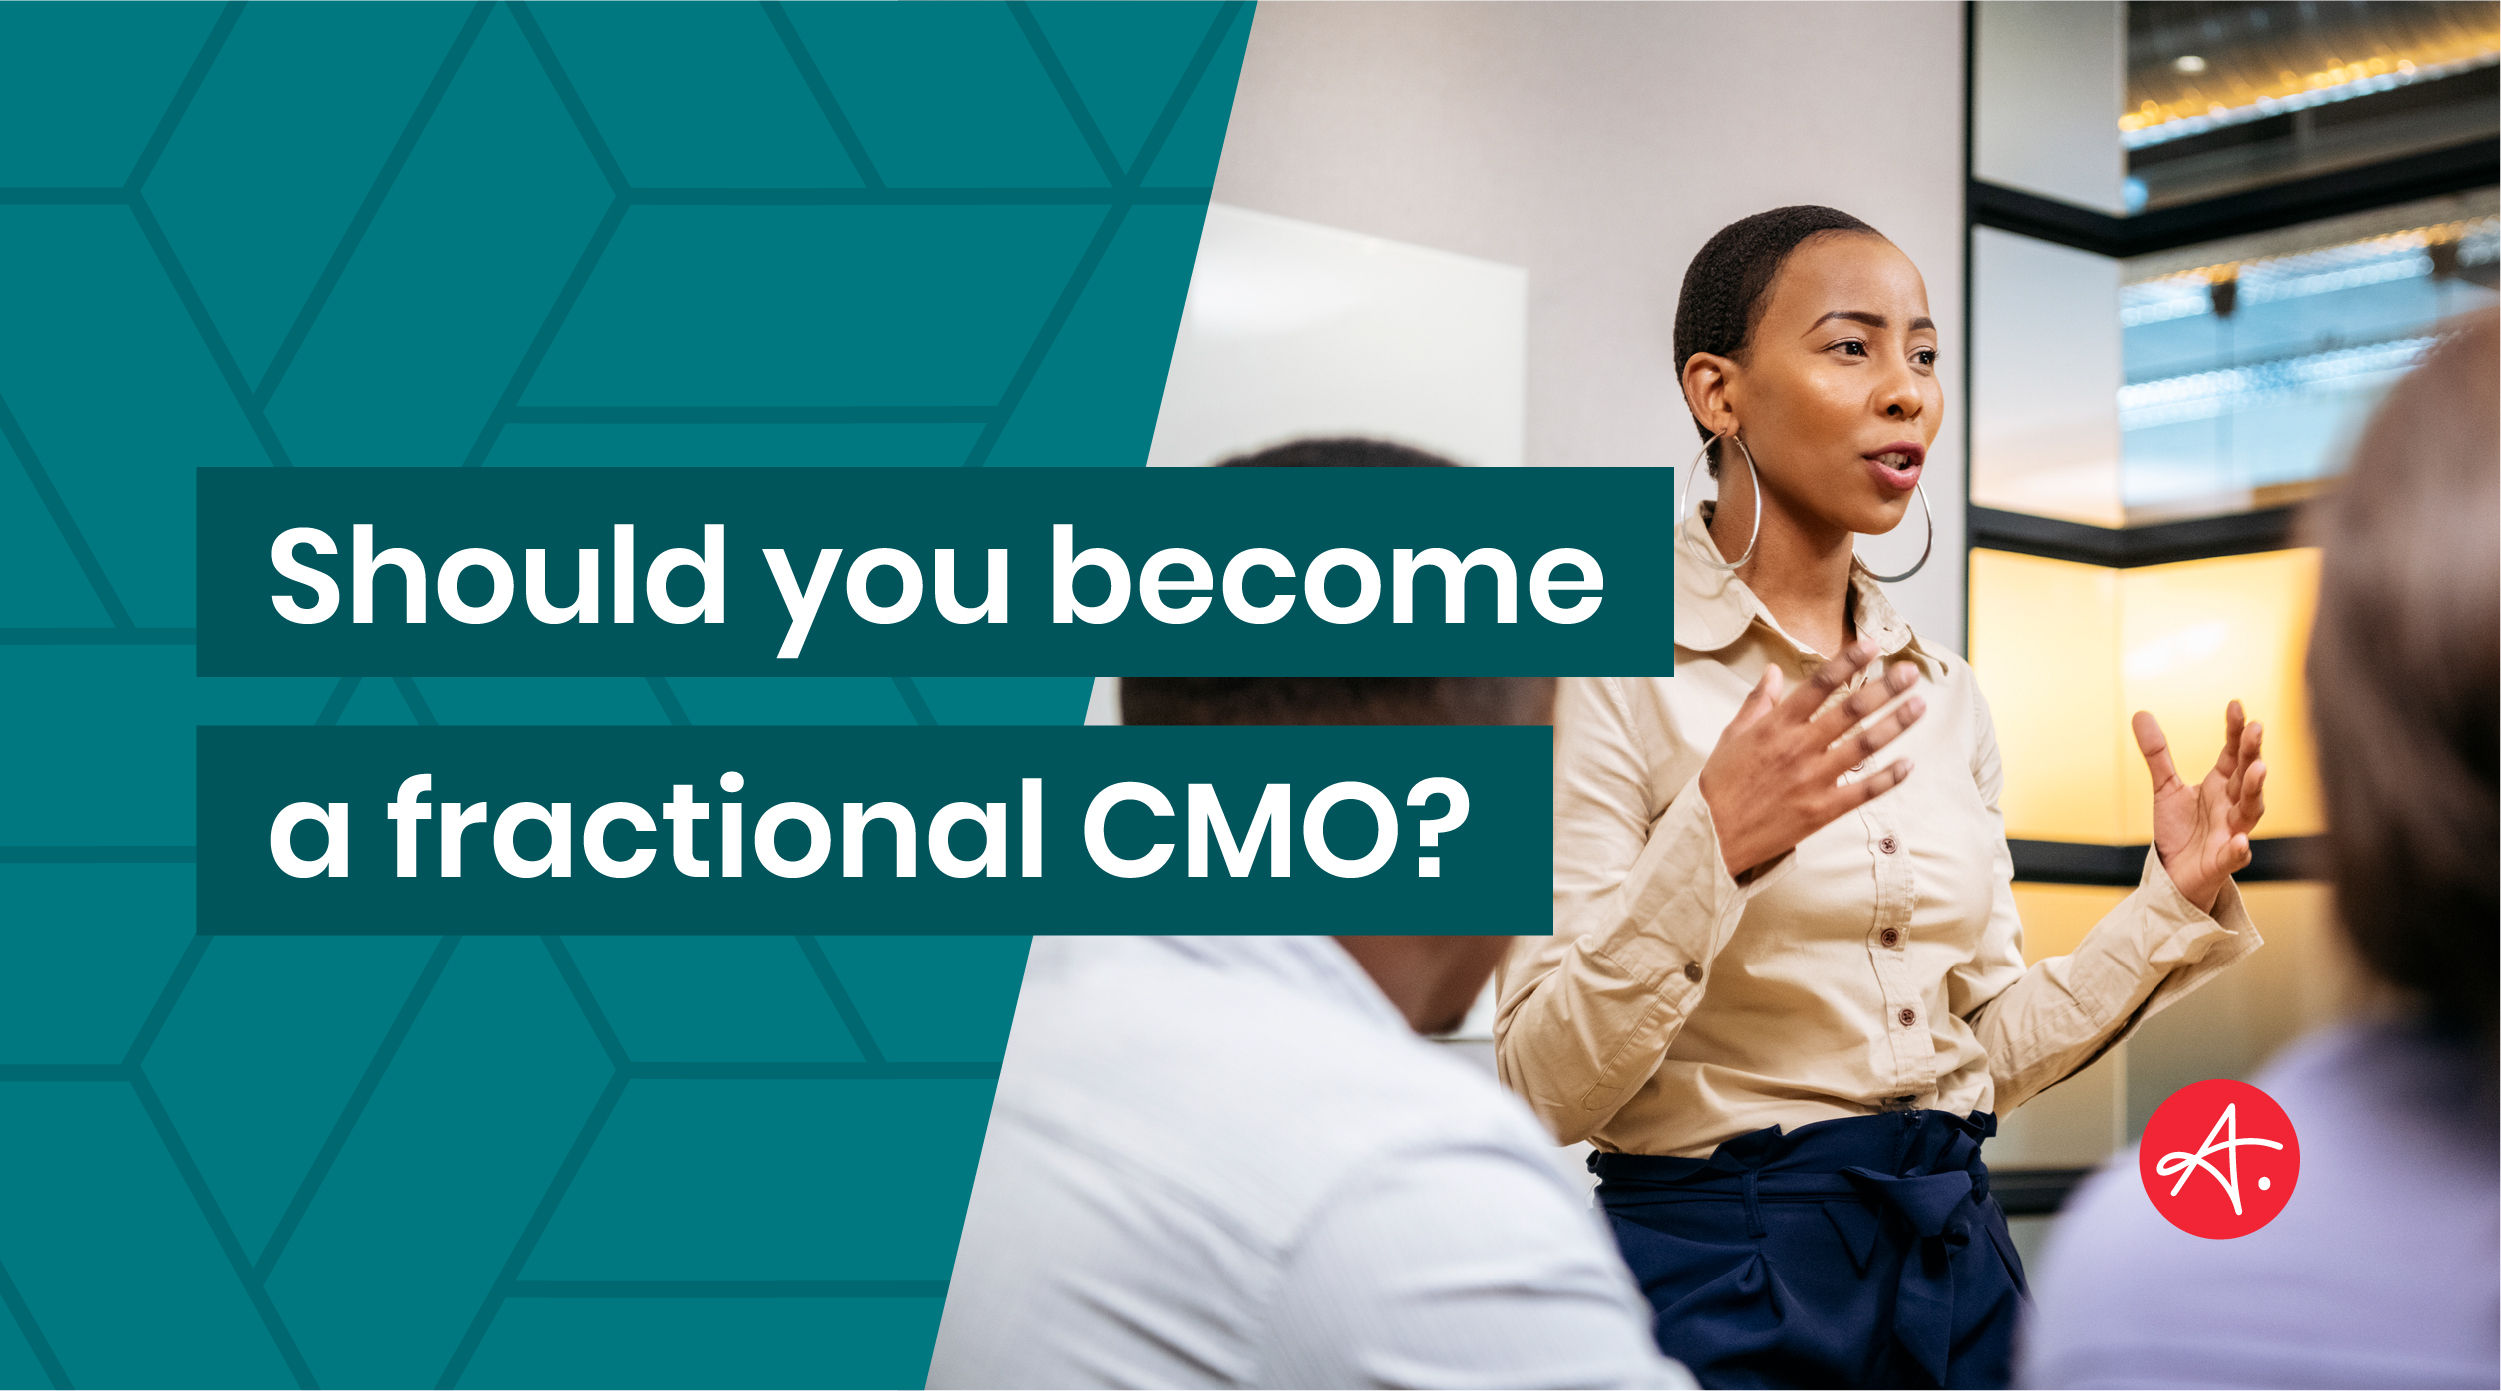 Should you become a fractional CMO?